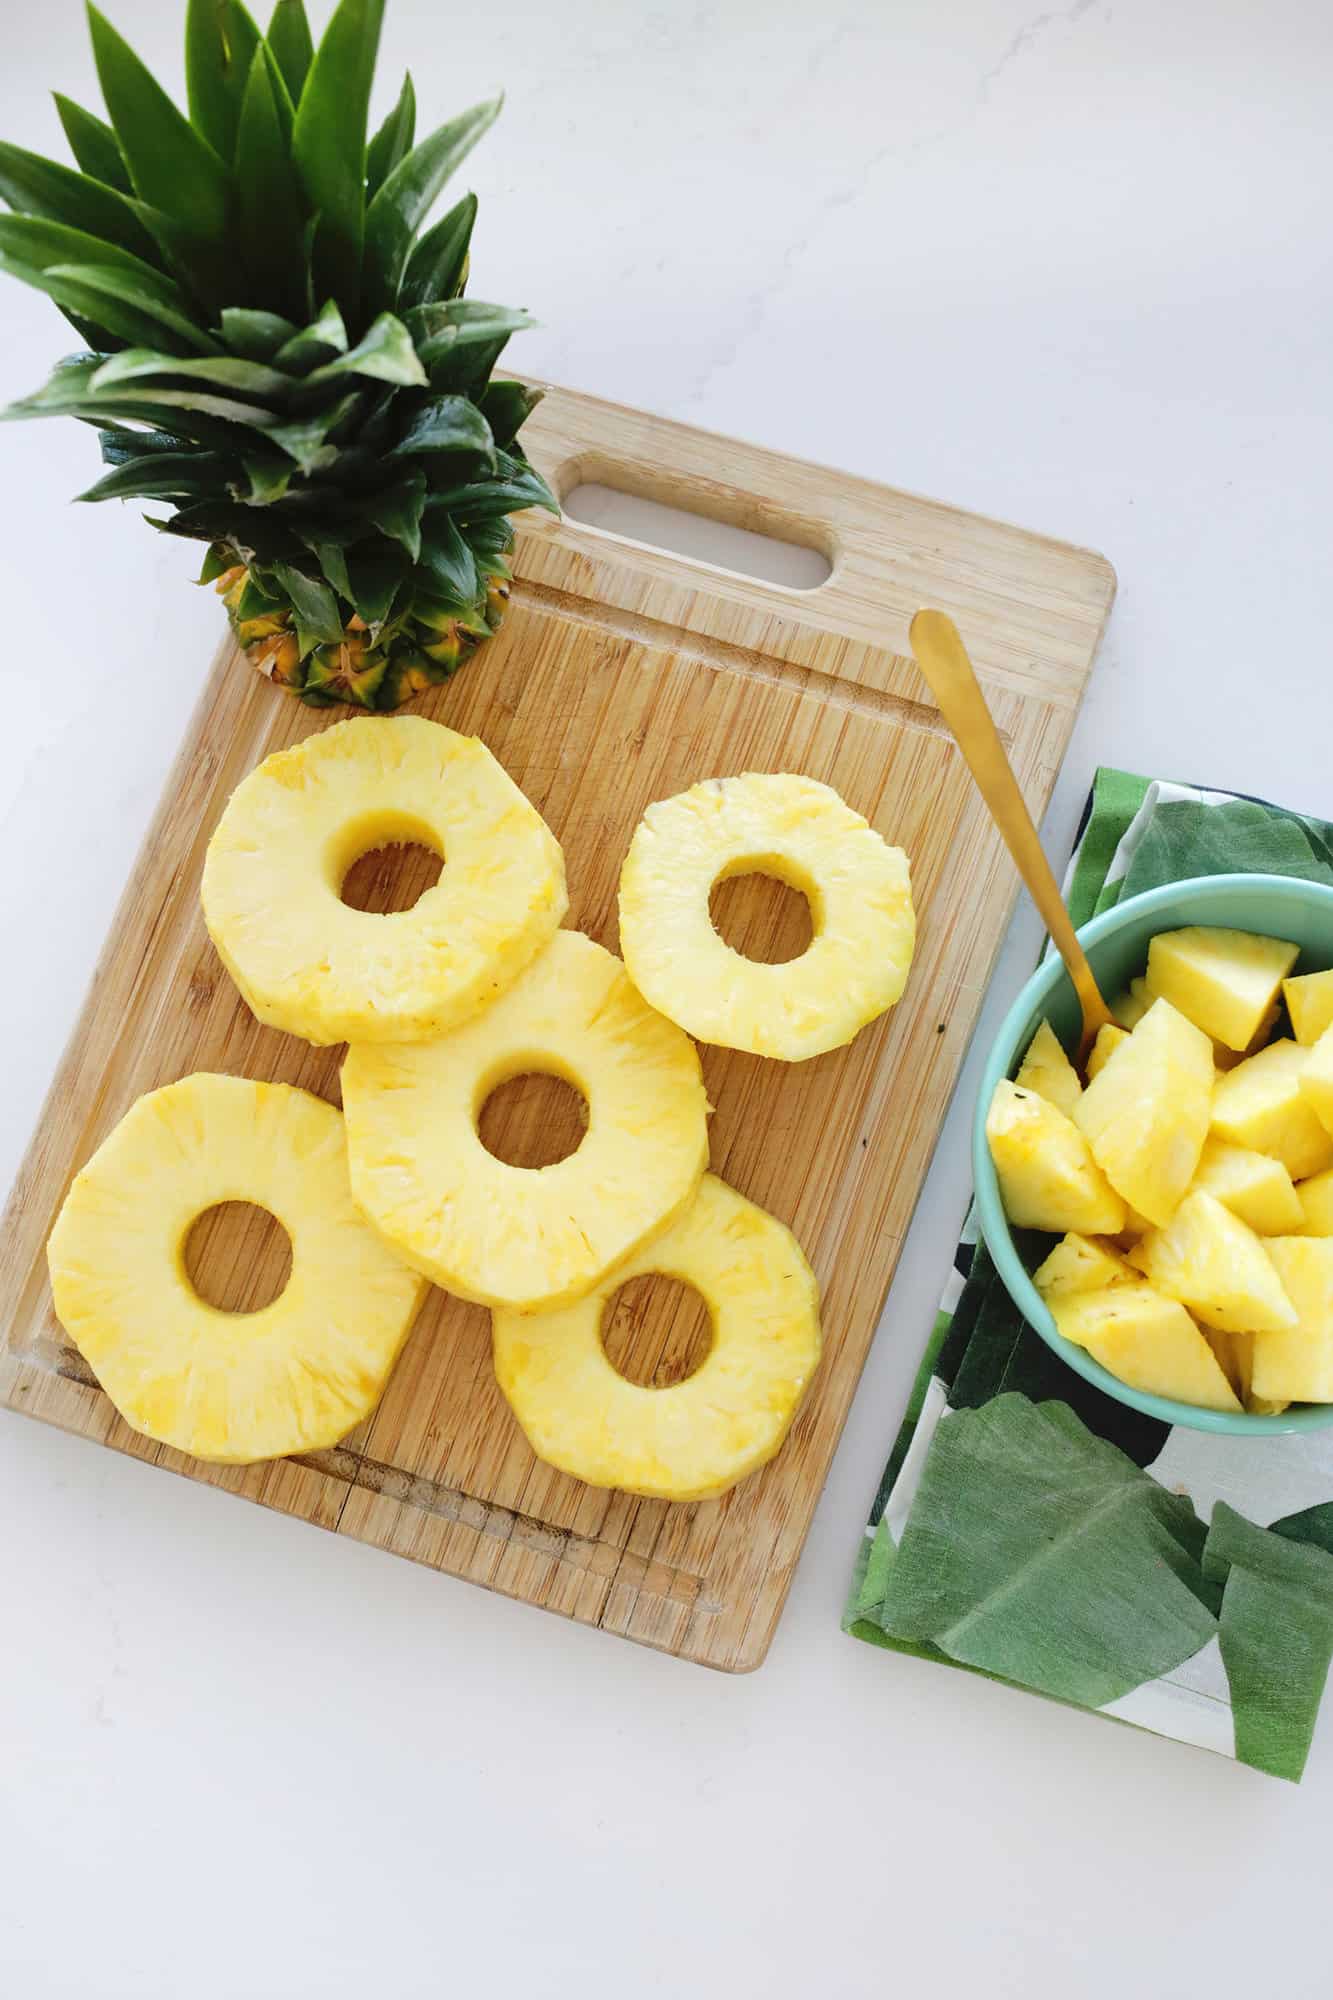 cubed and rings of pineapple